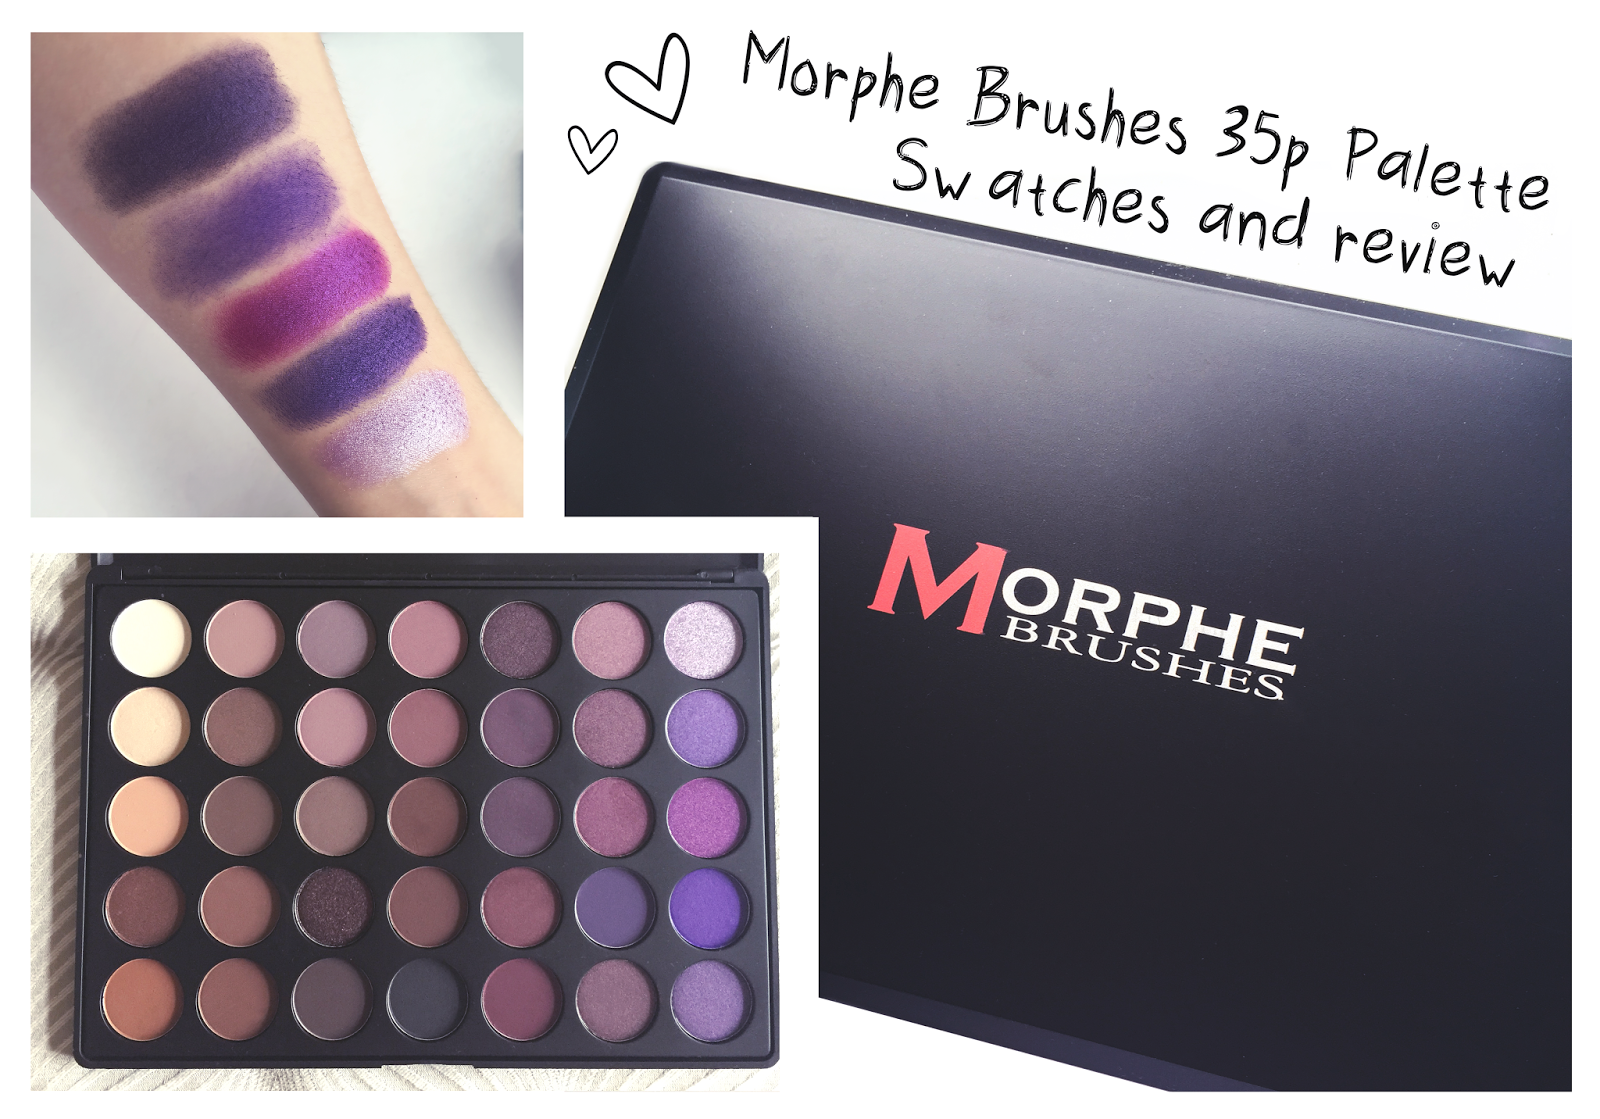 Today I will be showing and talking breifly about the Morphe 35P Plum Palet...